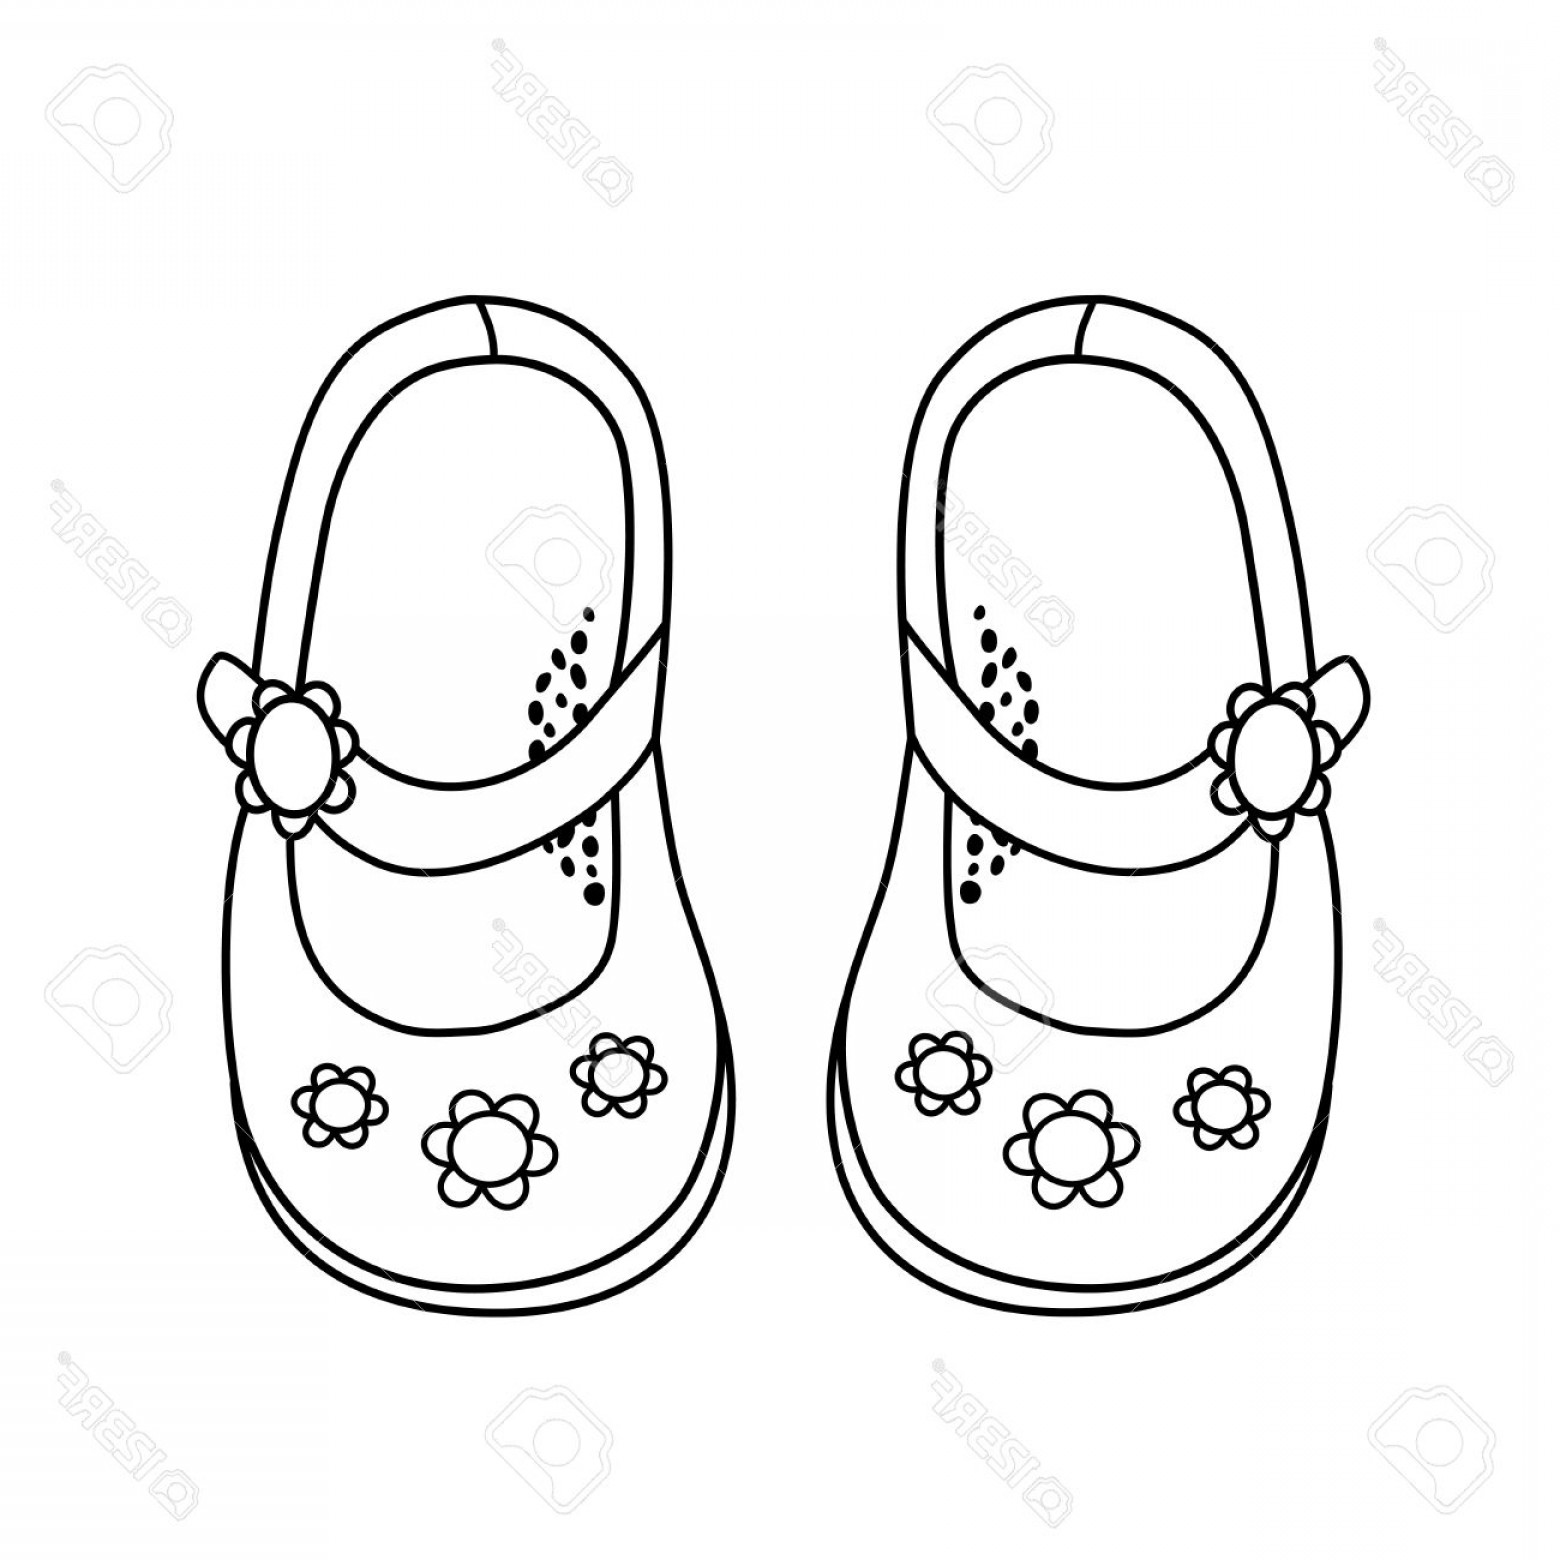 Outline of shoes clipart